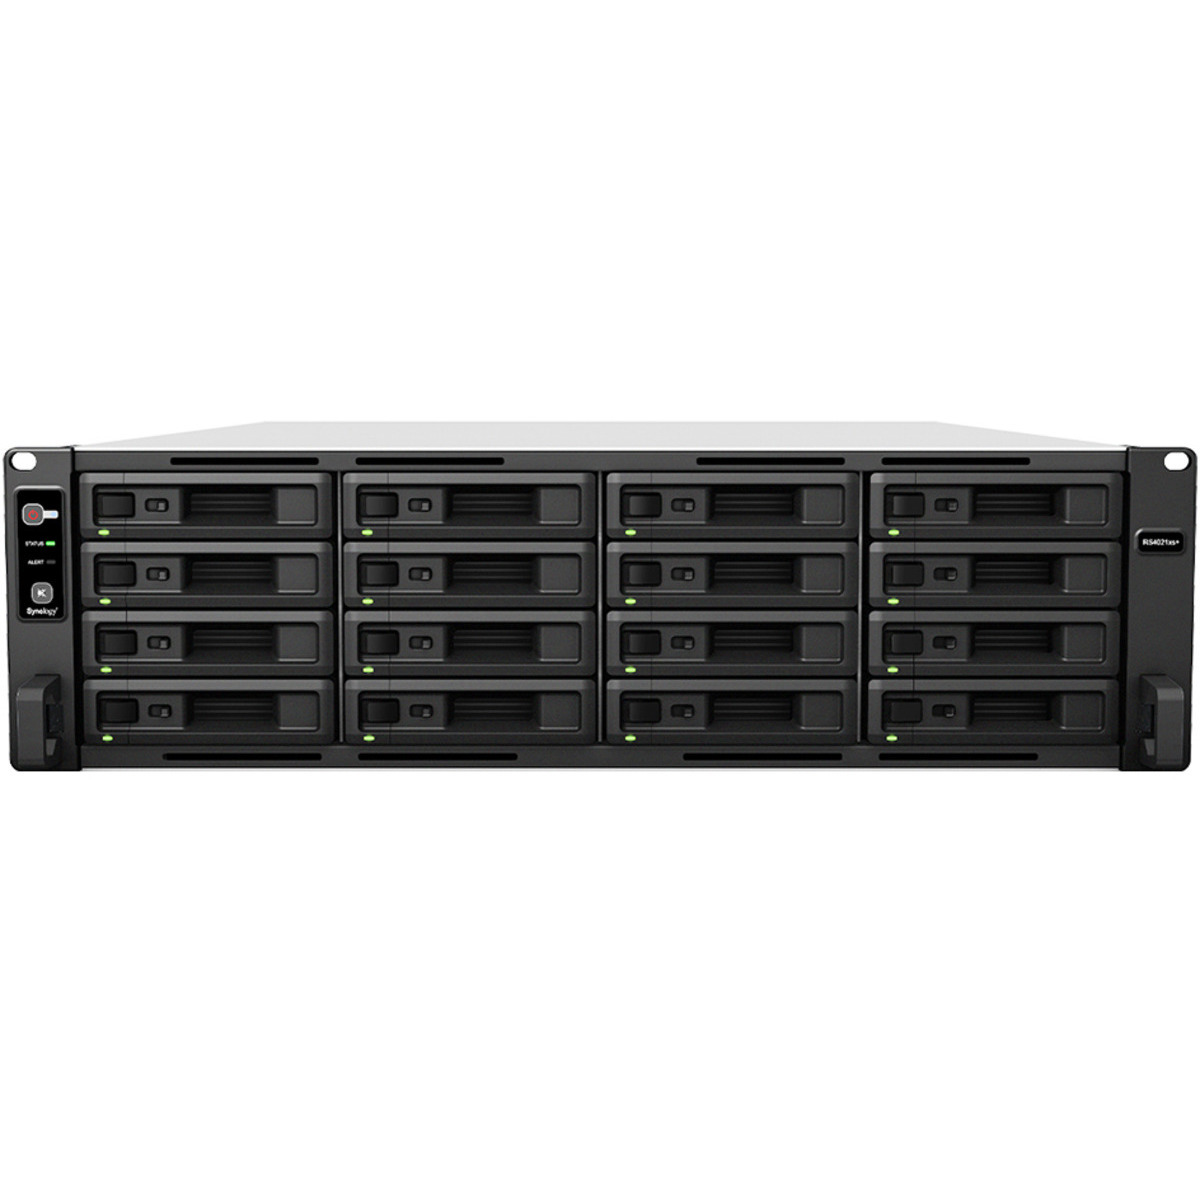 buy Synology RackStation RS4021xs+ 320tb RackMount NAS - Network Attached Storage Device 16x20000gb Seagate EXOS X20 ST20000NM007D 3.5 7200rpm SATA 6Gb/s HDD ENTERPRISE Class Drives Installed - Burn-In Tested - nas headquarters buy network attached storage server device das new raid-5 free shipping simply usa RackStation RS4021xs+